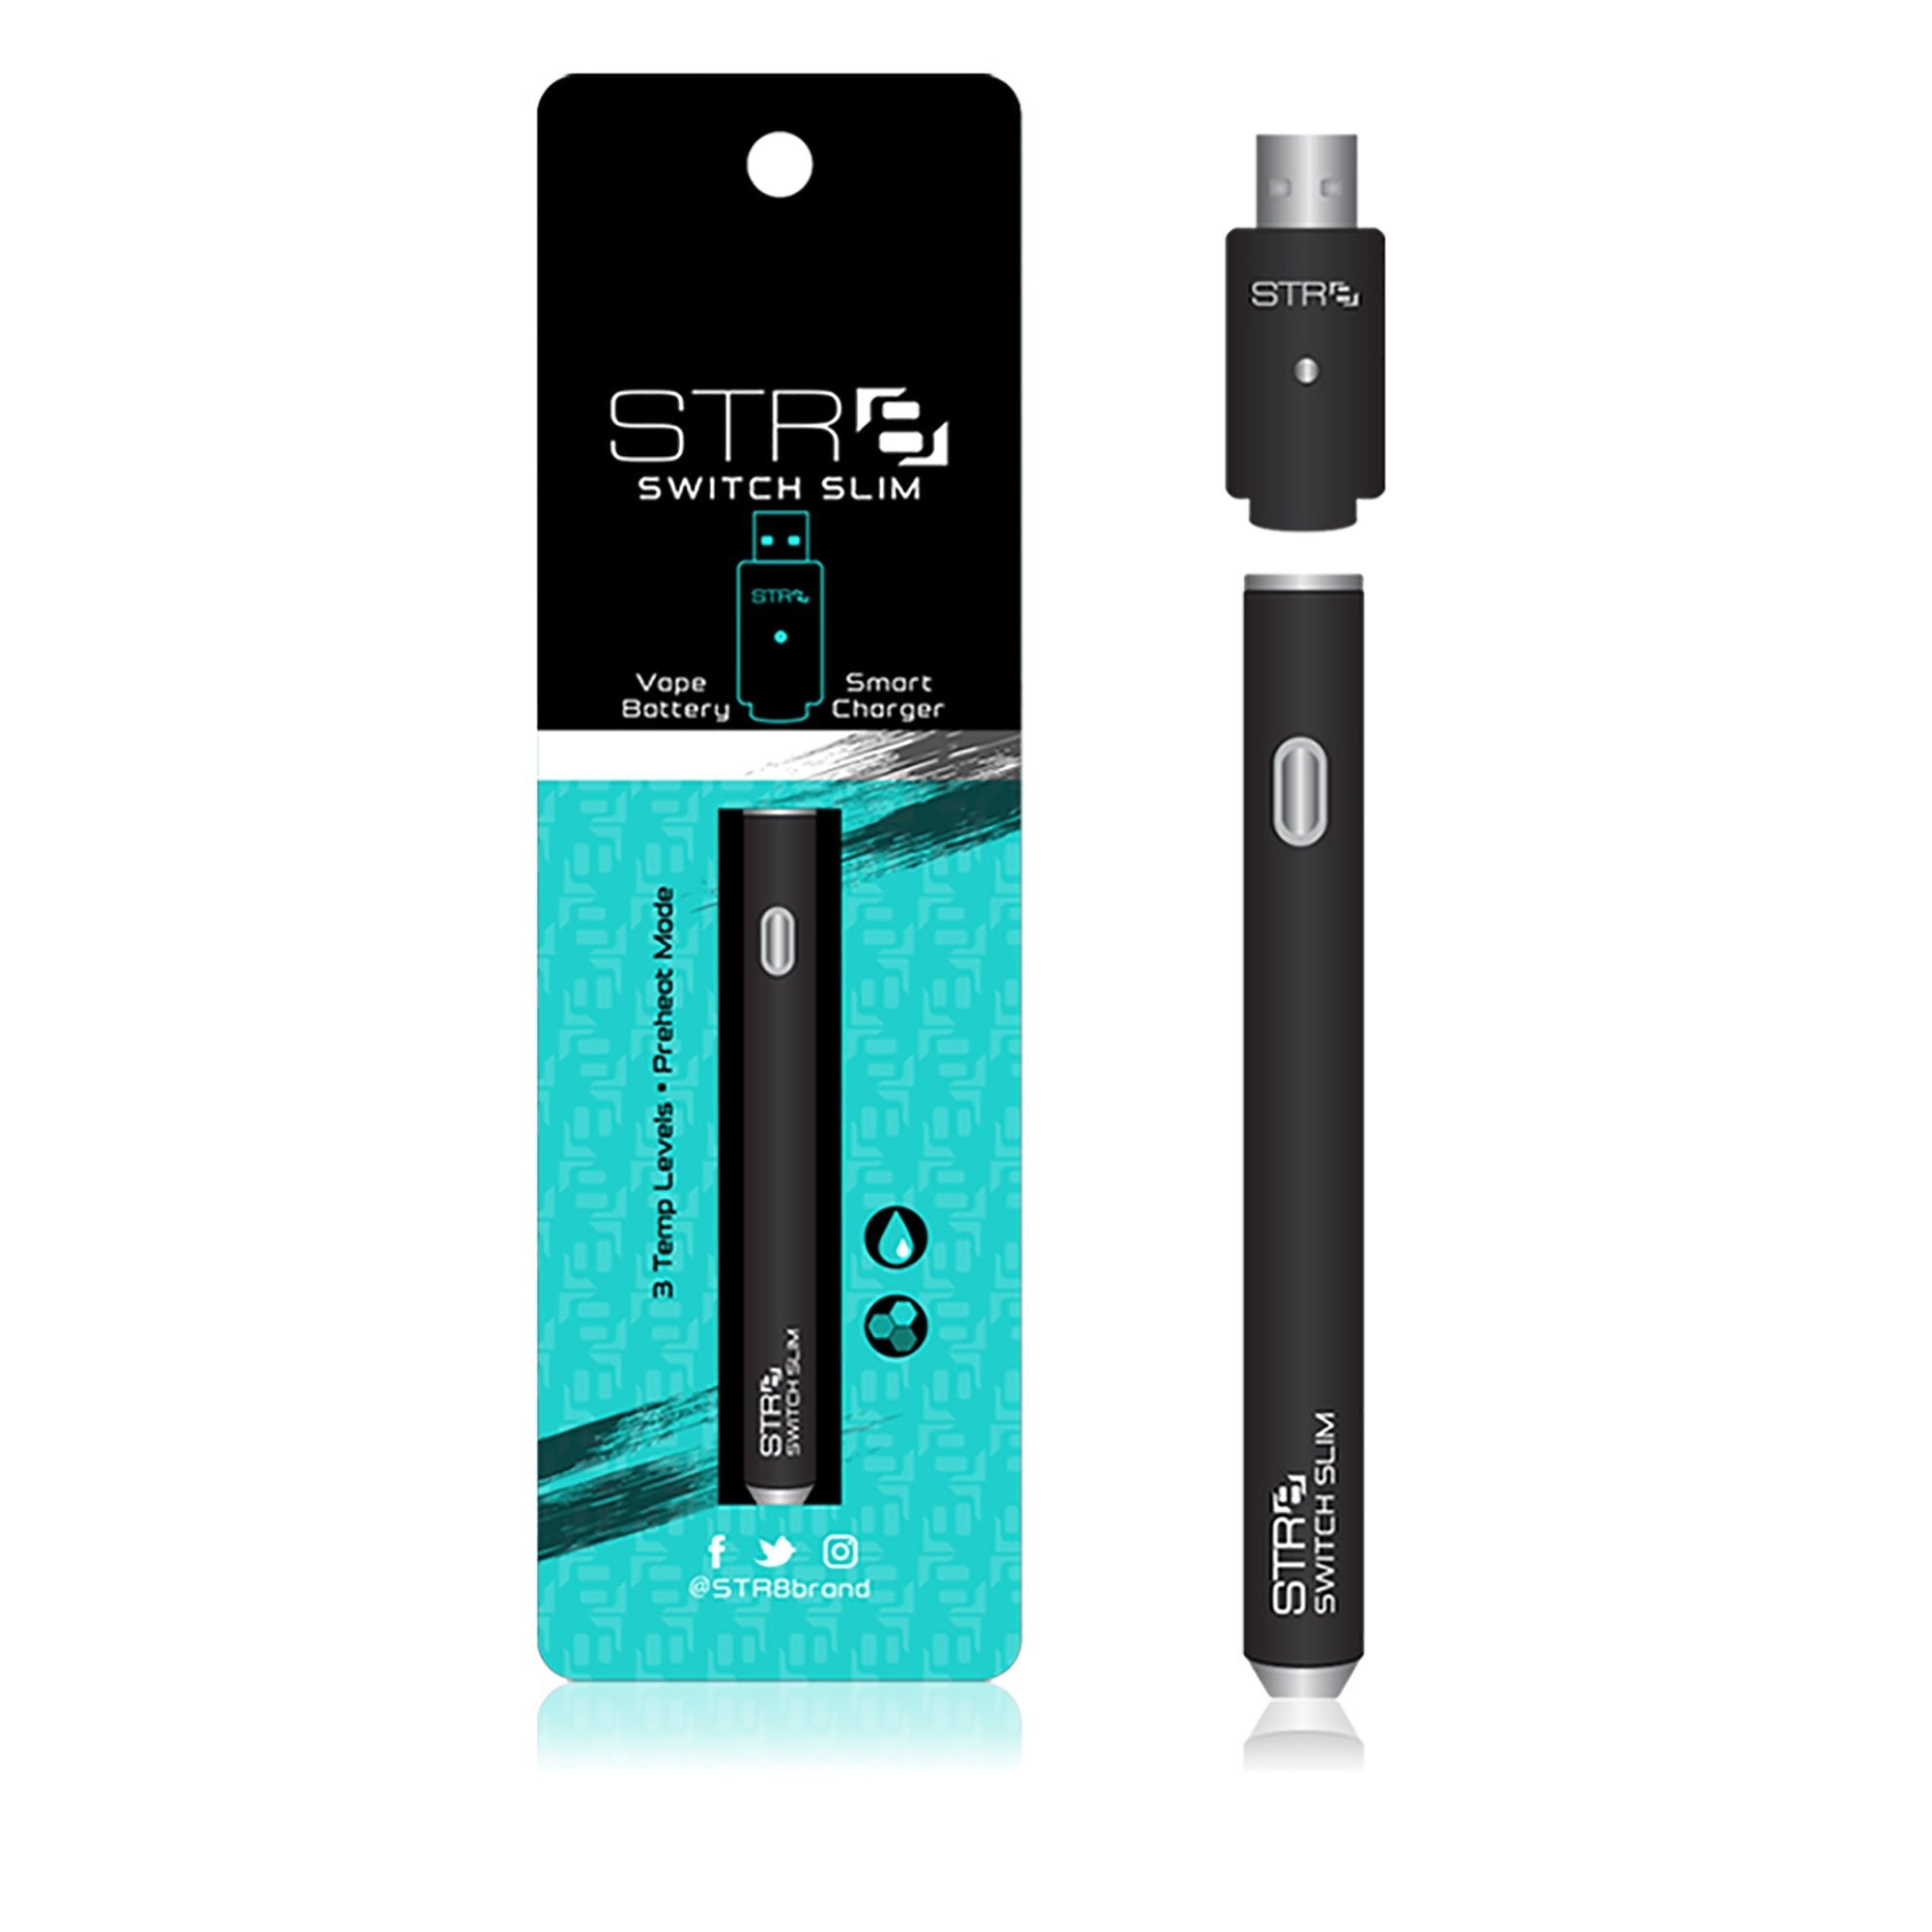 STR8 | Black Slim Switch Battery w/ Charger 280MAH - 5 Count - 1